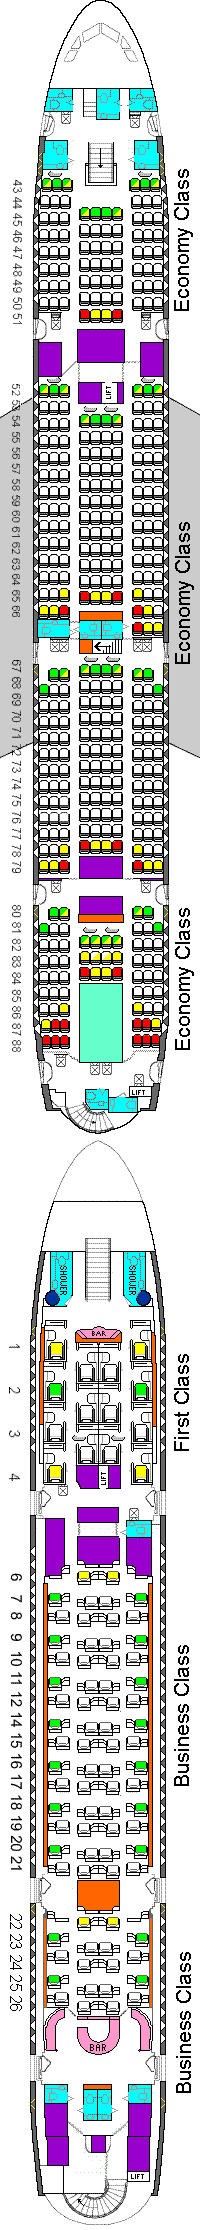 Emirates Airlines A380 seating plan